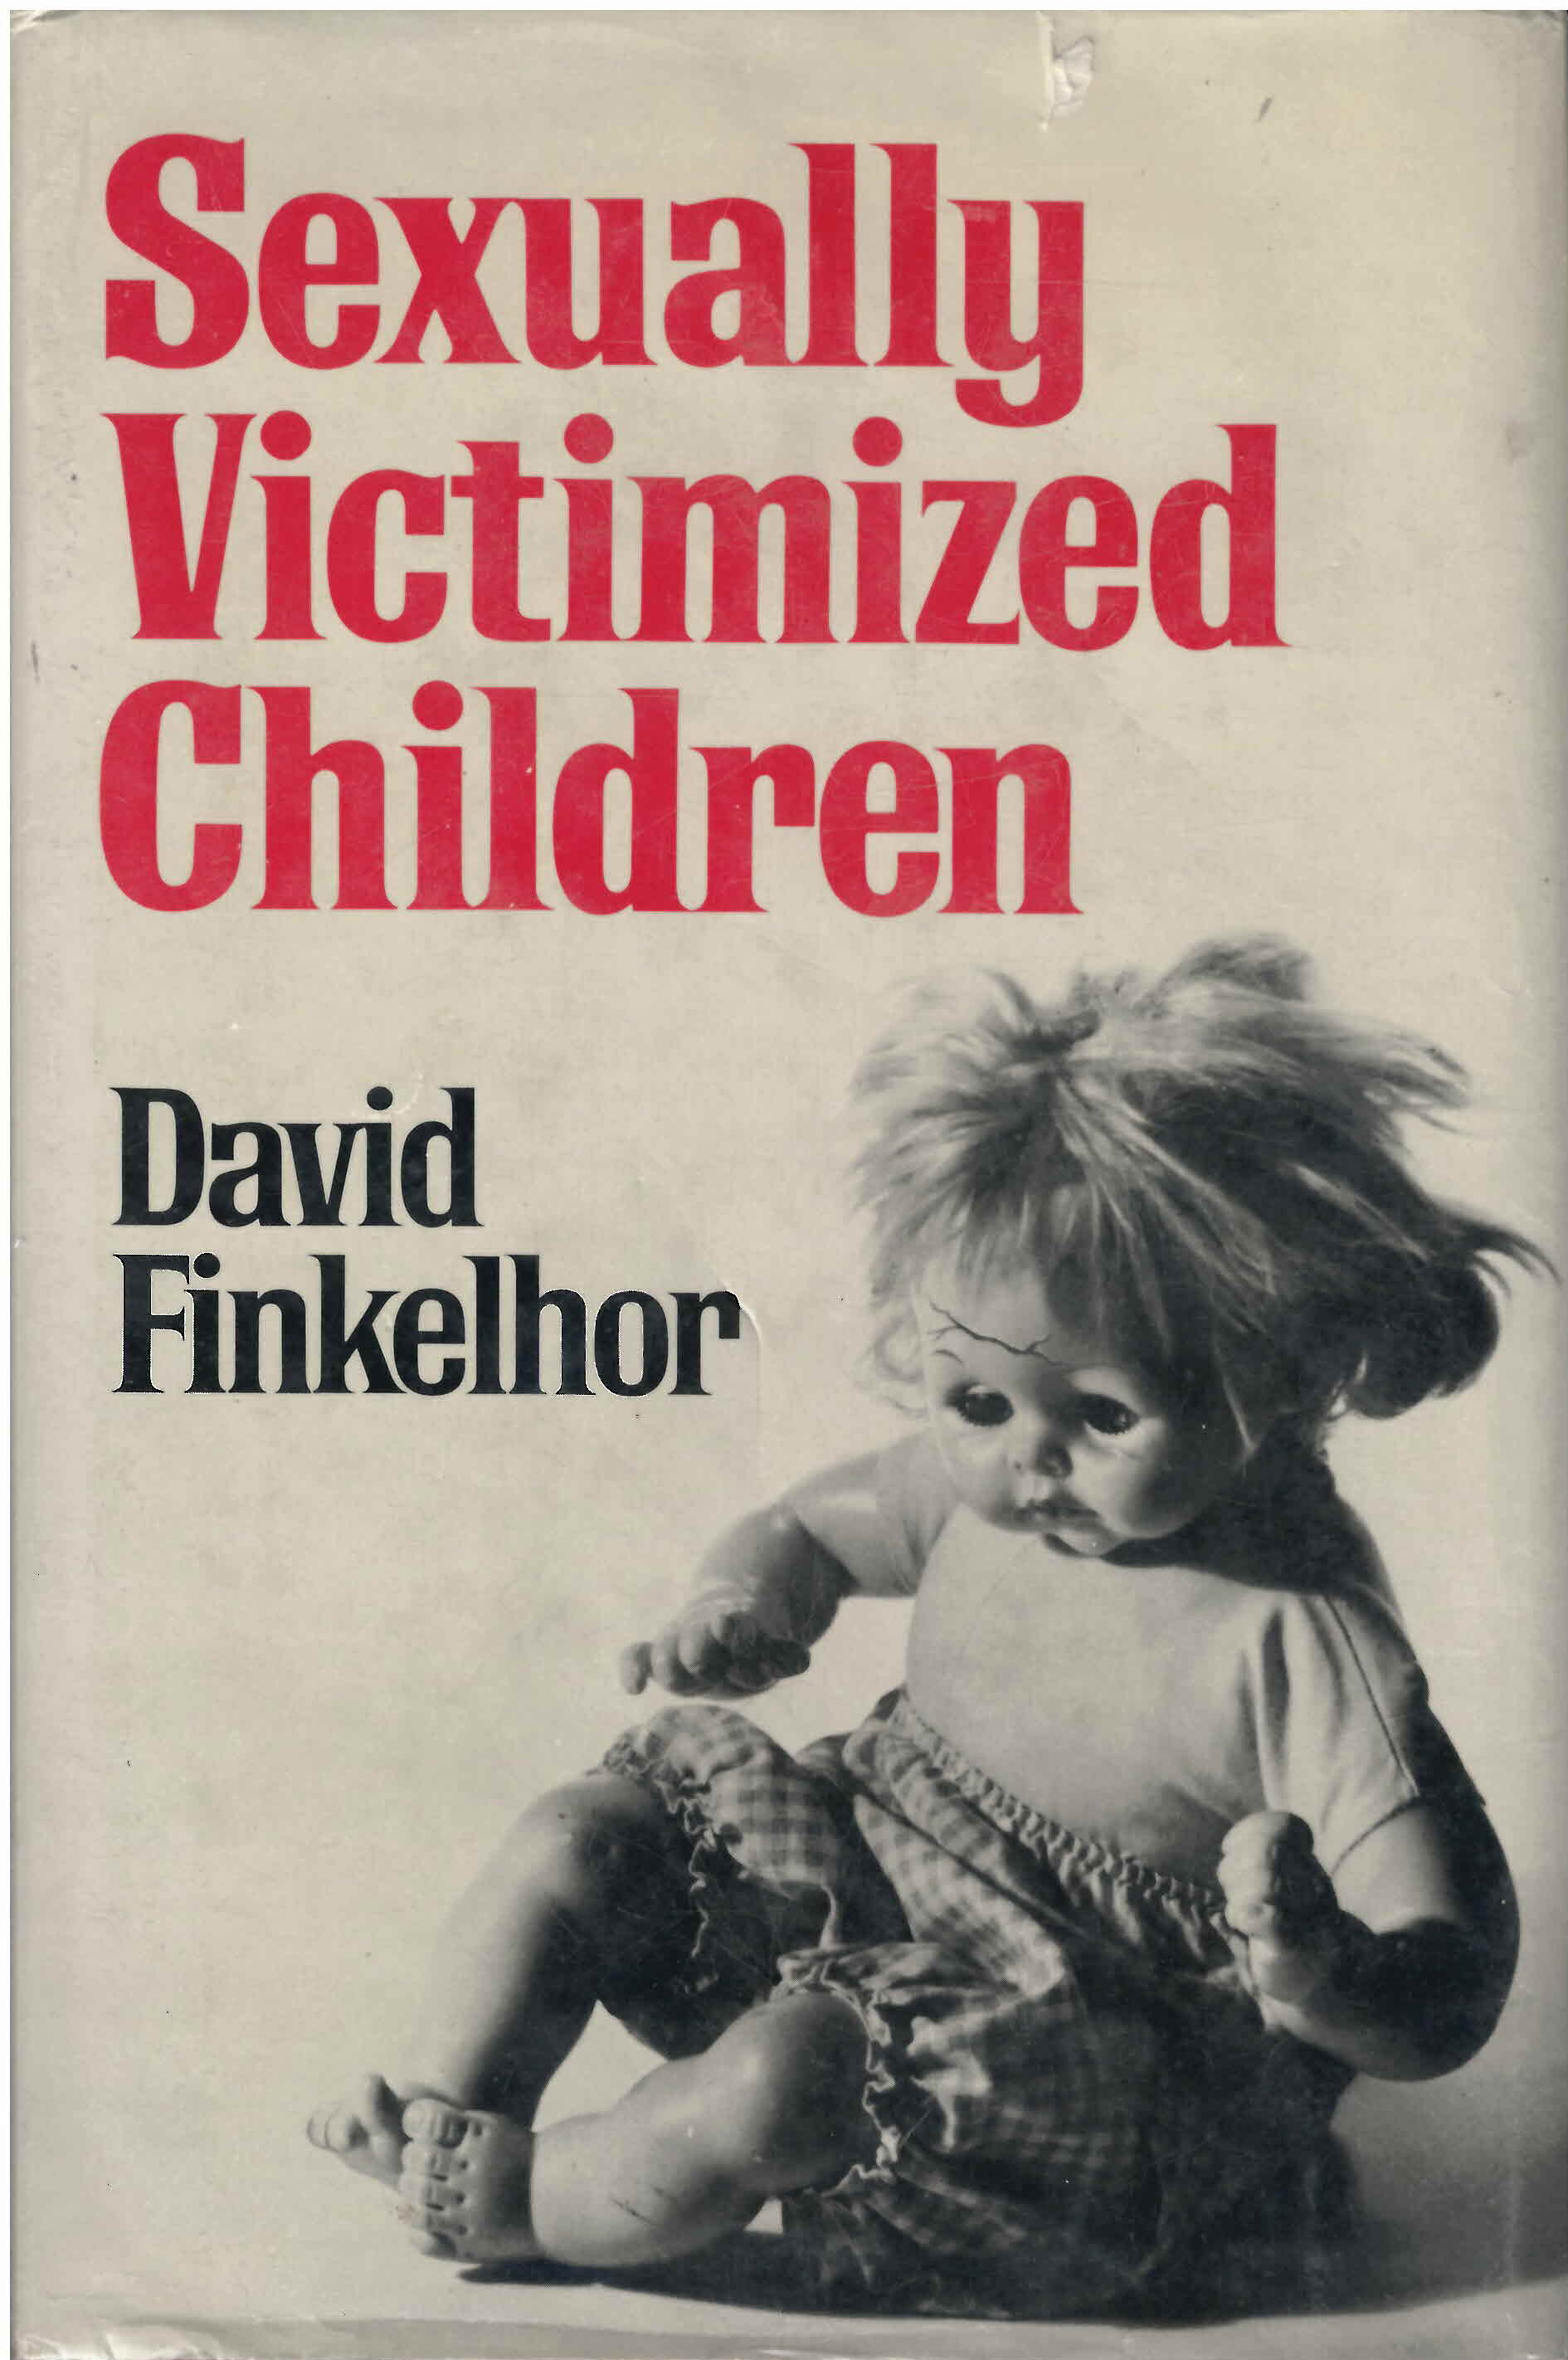 Sexually victimized children